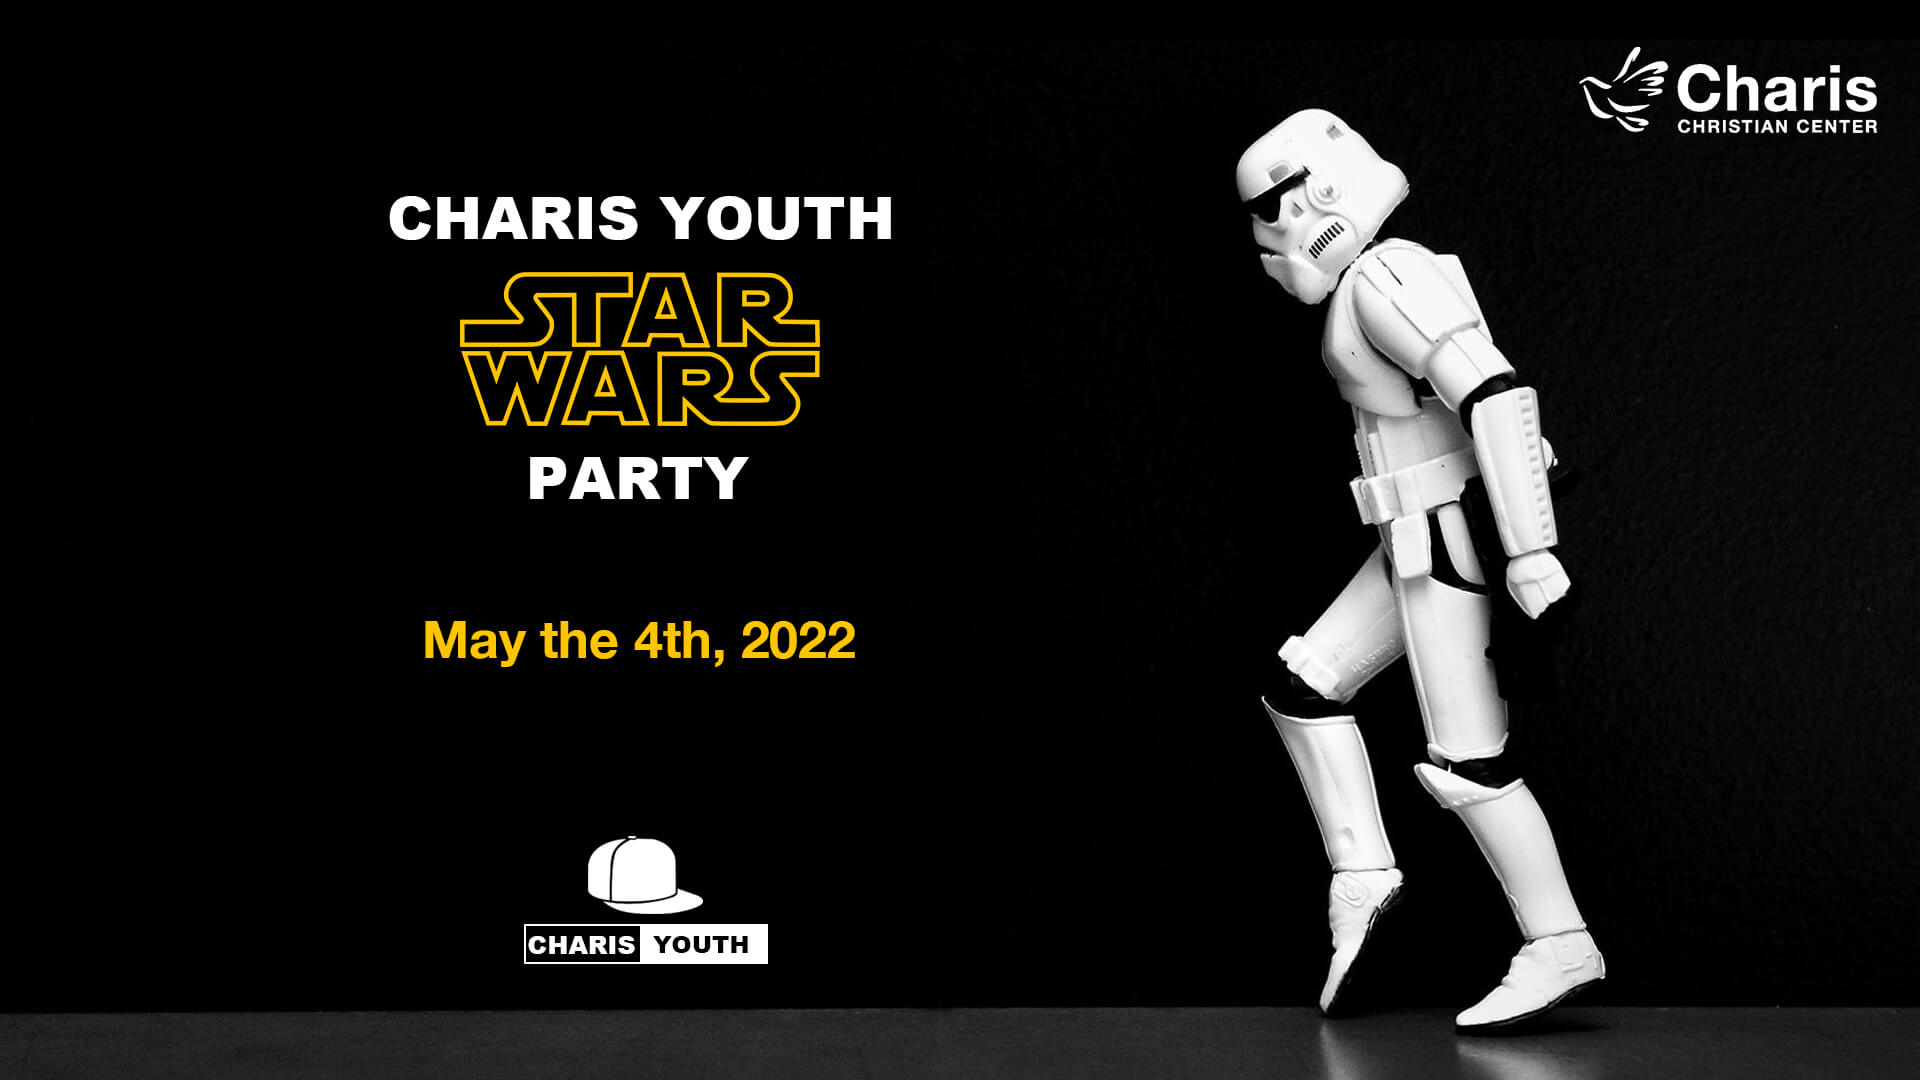 Charis Youth Star Wars Party